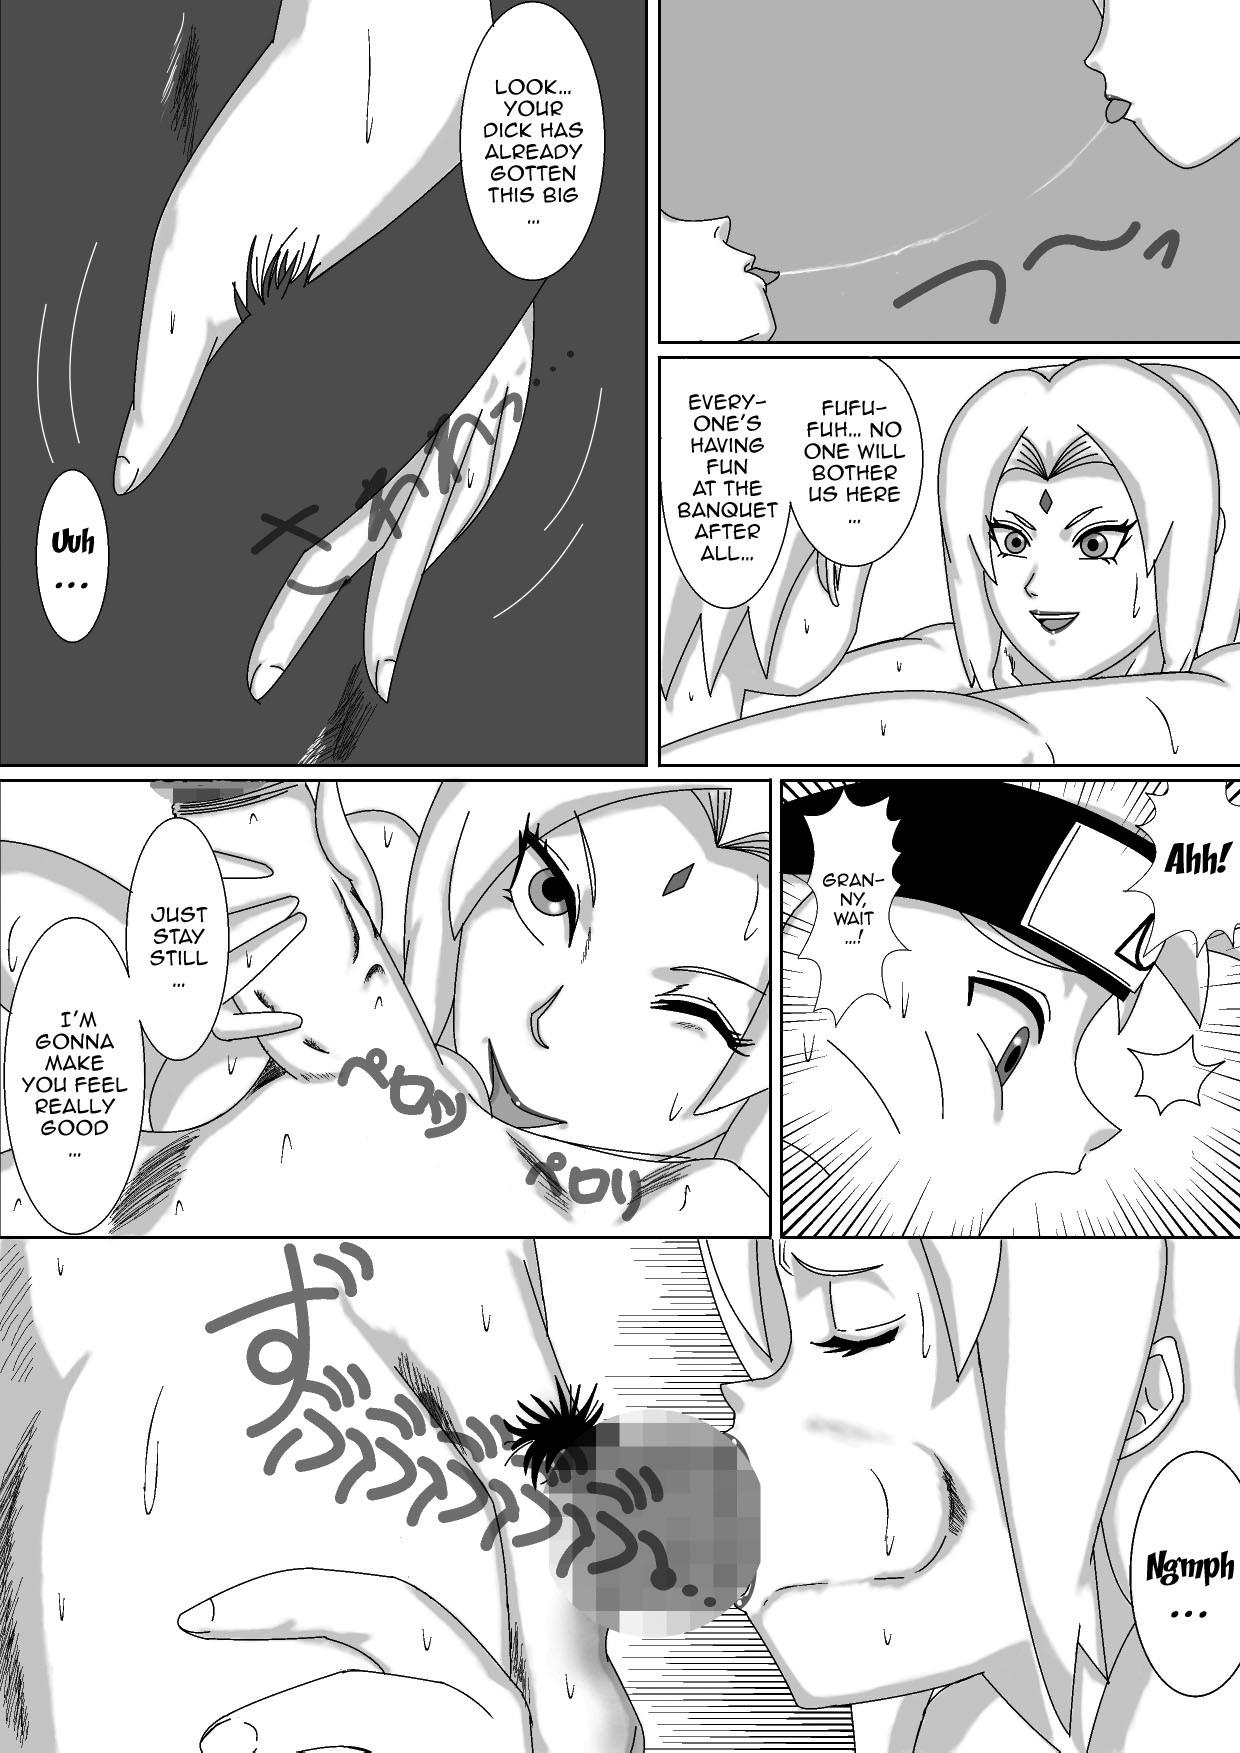 Teen Hardcore Nomisugite Deisui Shita BBA to Yarimakutta Ken!! | The Case Of Having Sex With This Old Lady After She Got Herself Really Drunk - Naruto Adolescente - Page 7